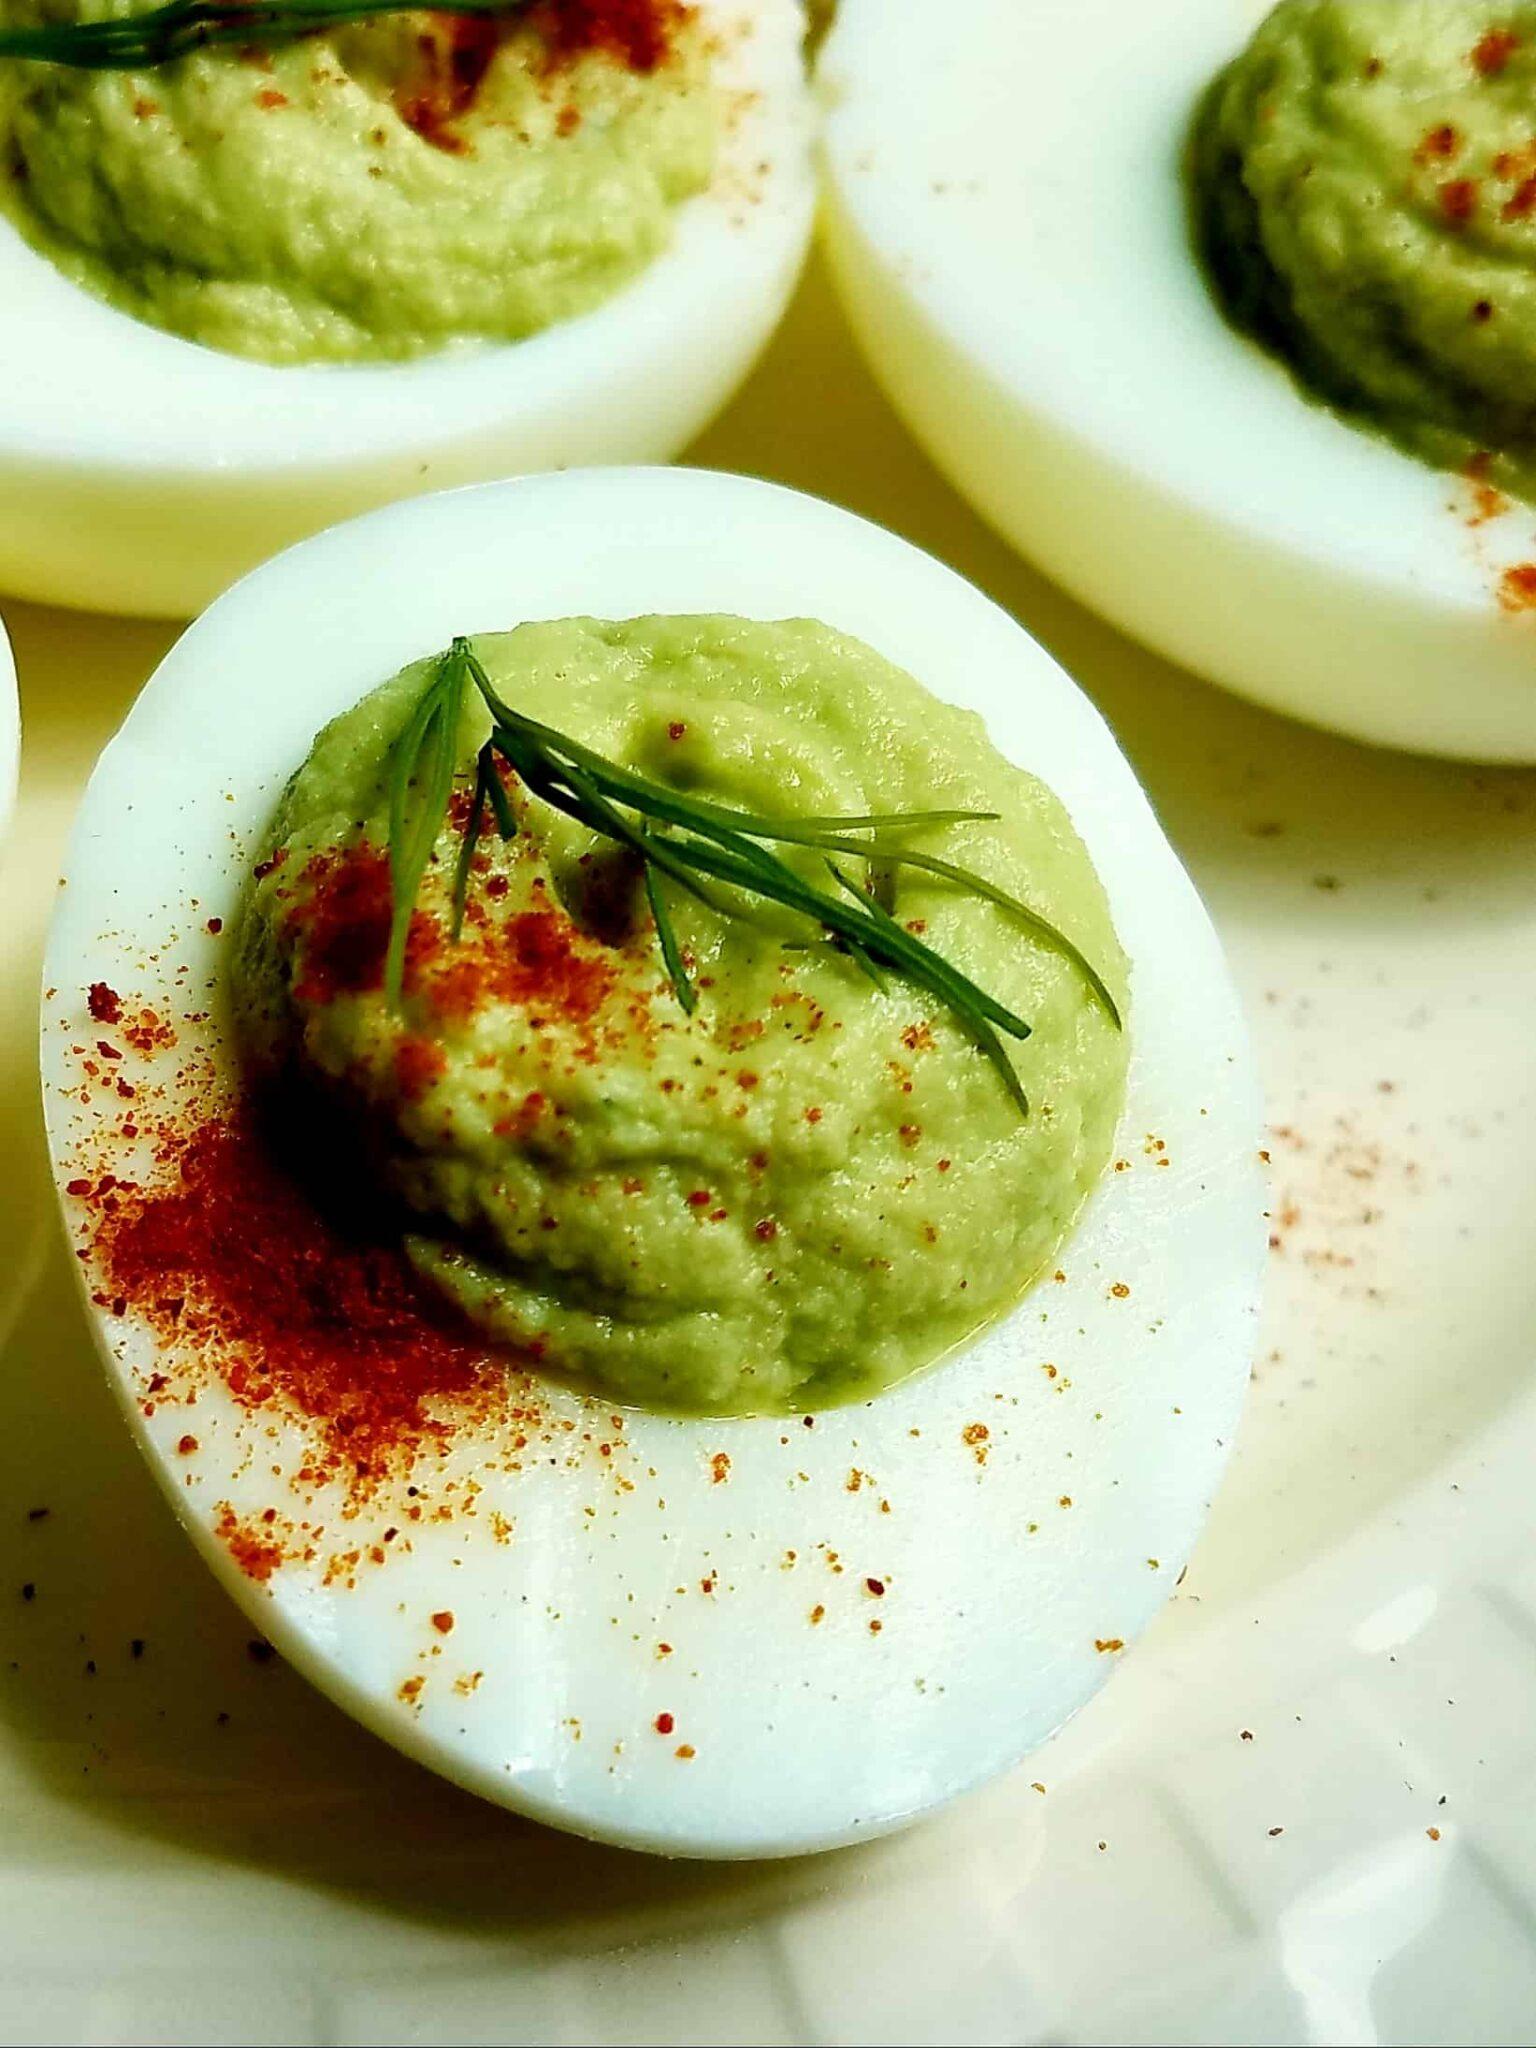 Healthy angeled eggs with a green filling